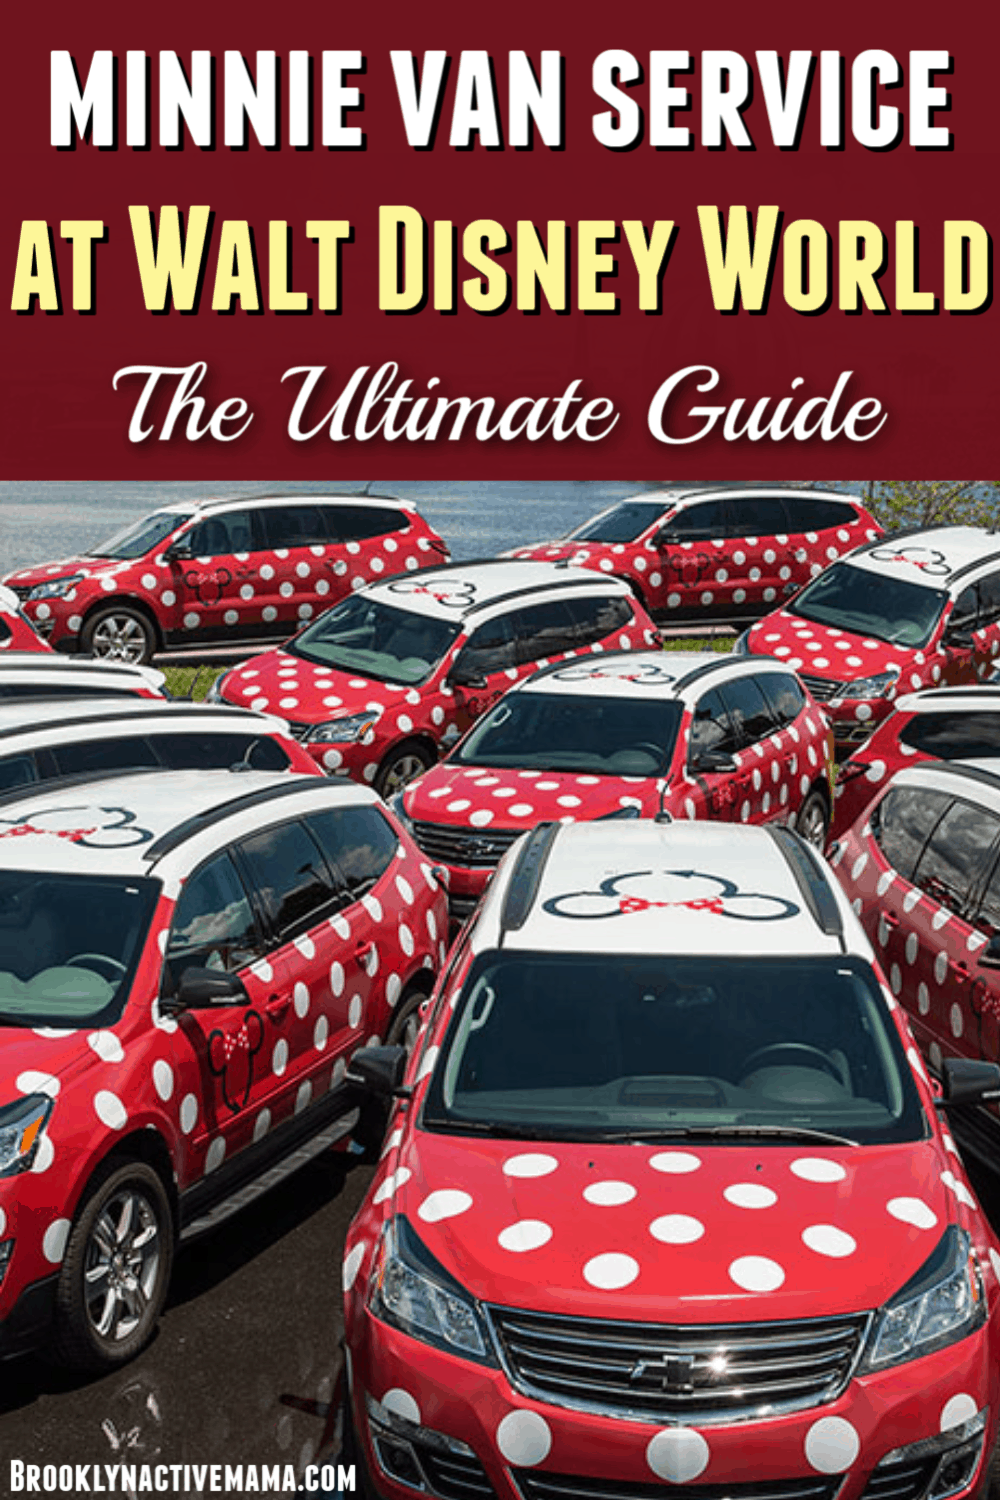 Have you tried the new Minnie Van service is Walt Disney World that takes you all over the resorts and even to the airport? Check out these 5 Must now facts about the Minnie Van Service at Walt Disney World! #disney #disneytips